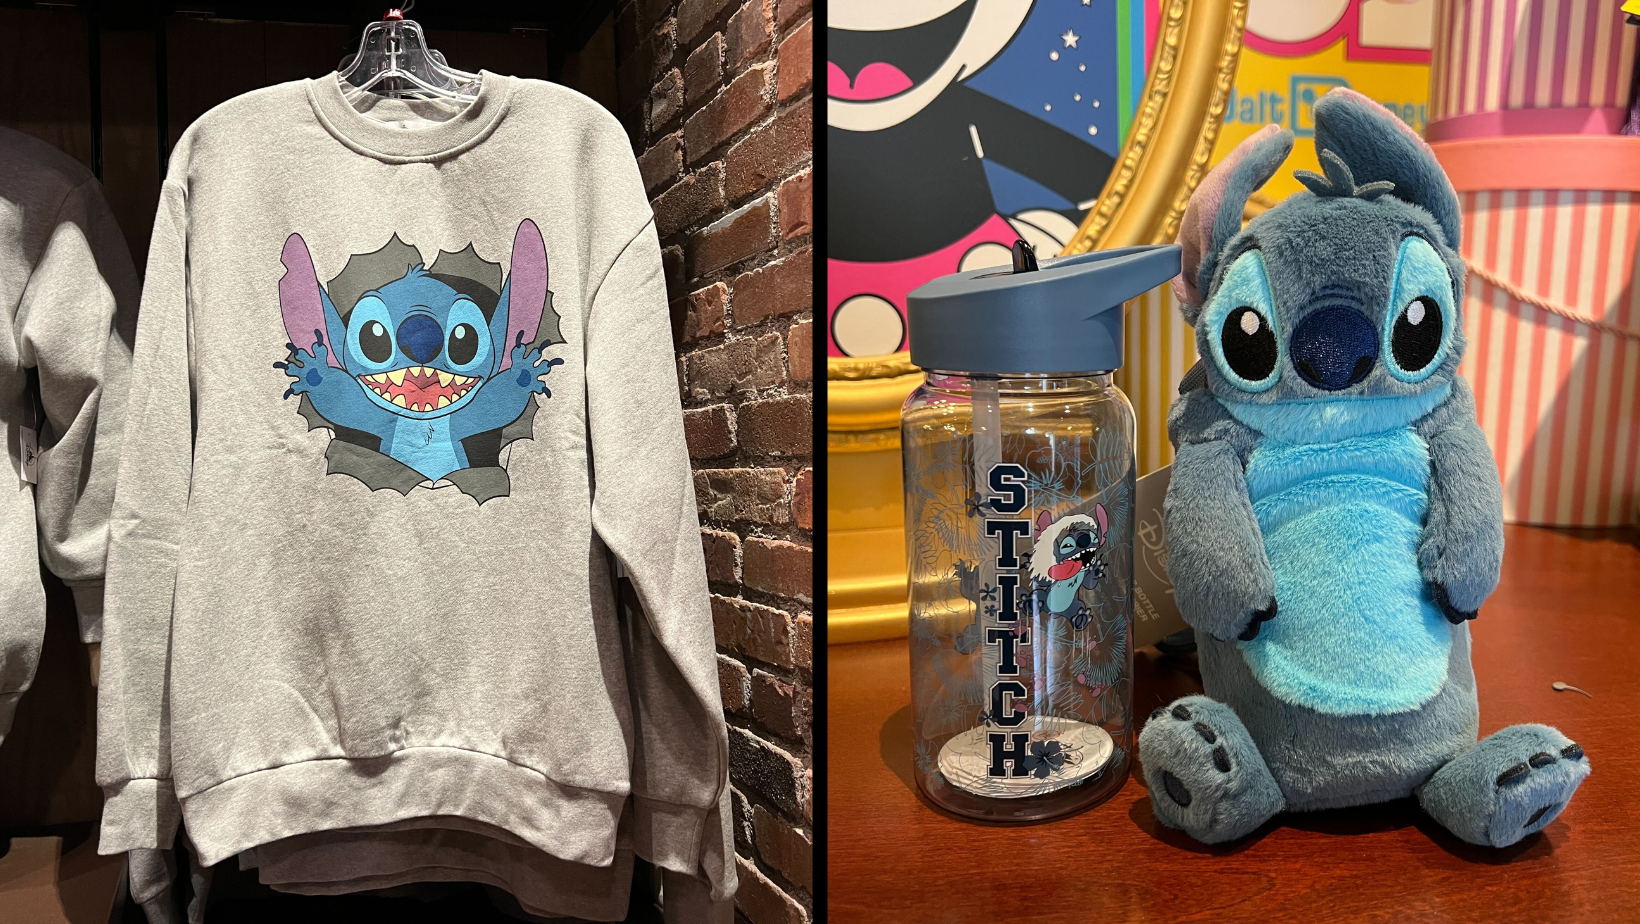 I found this Stitch merch at Primark! I need it all for our next Disney  trip!💙 #disneystyle #stitch 